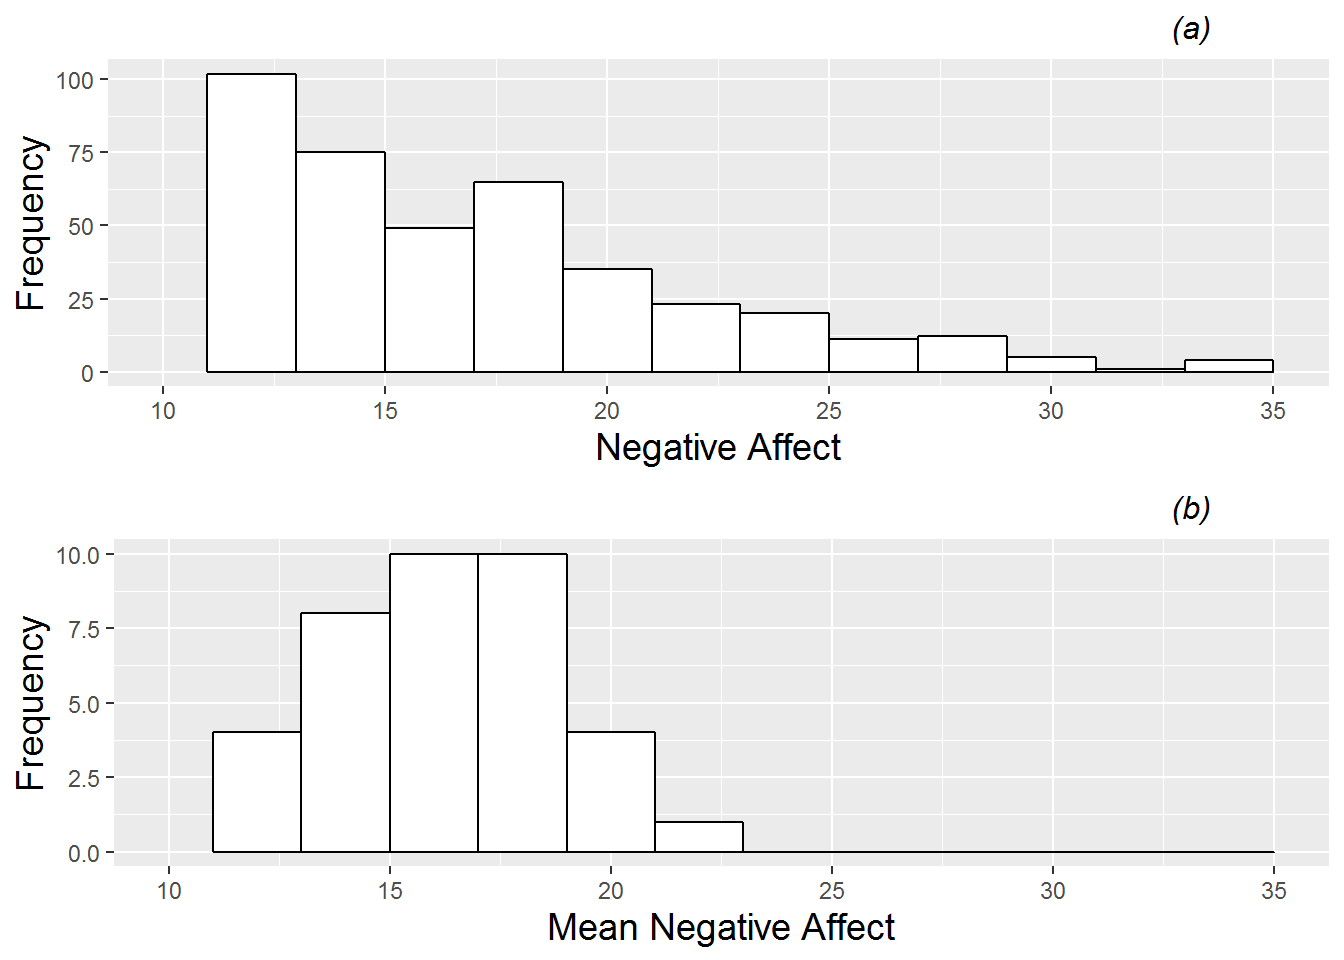 Histogram of the continuous Level One response (negative effect). Plot (a) contains all 497 performances across the 37 musicians, while plot (b) contains one observation per musician (the mean negative affect across all performances).